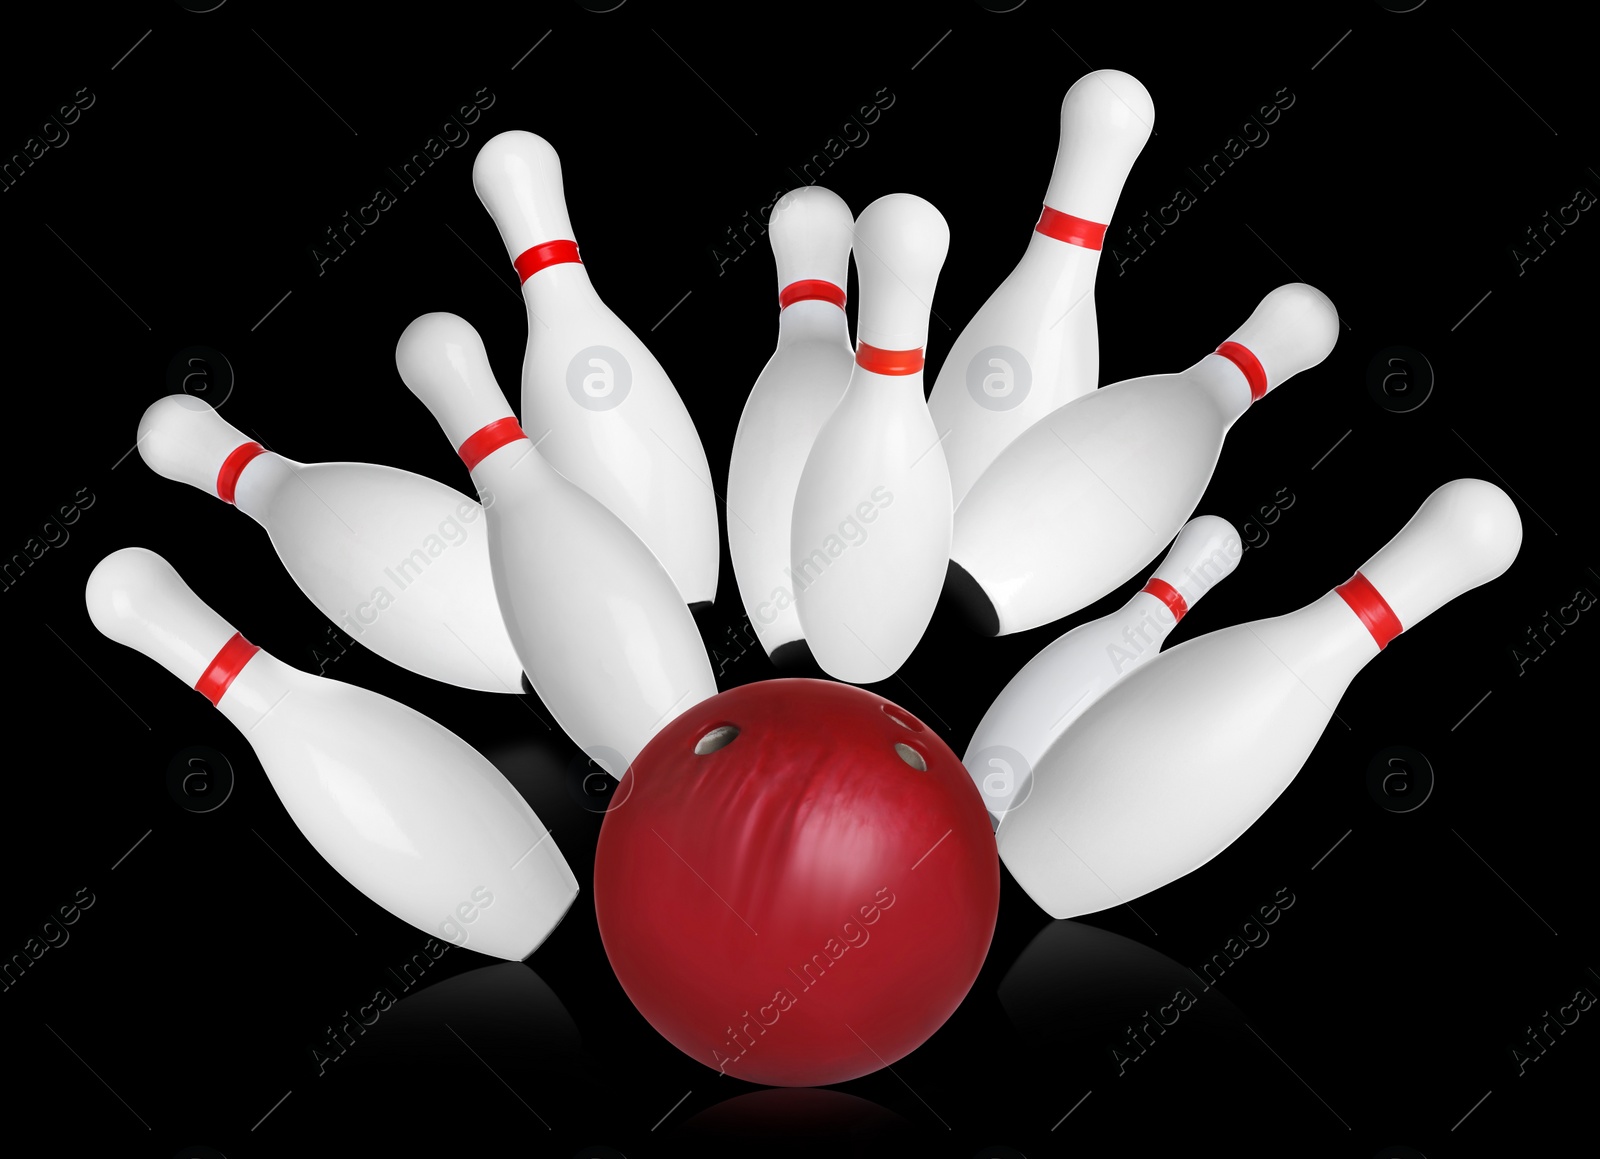 Image of Bowling pins and ball on black background